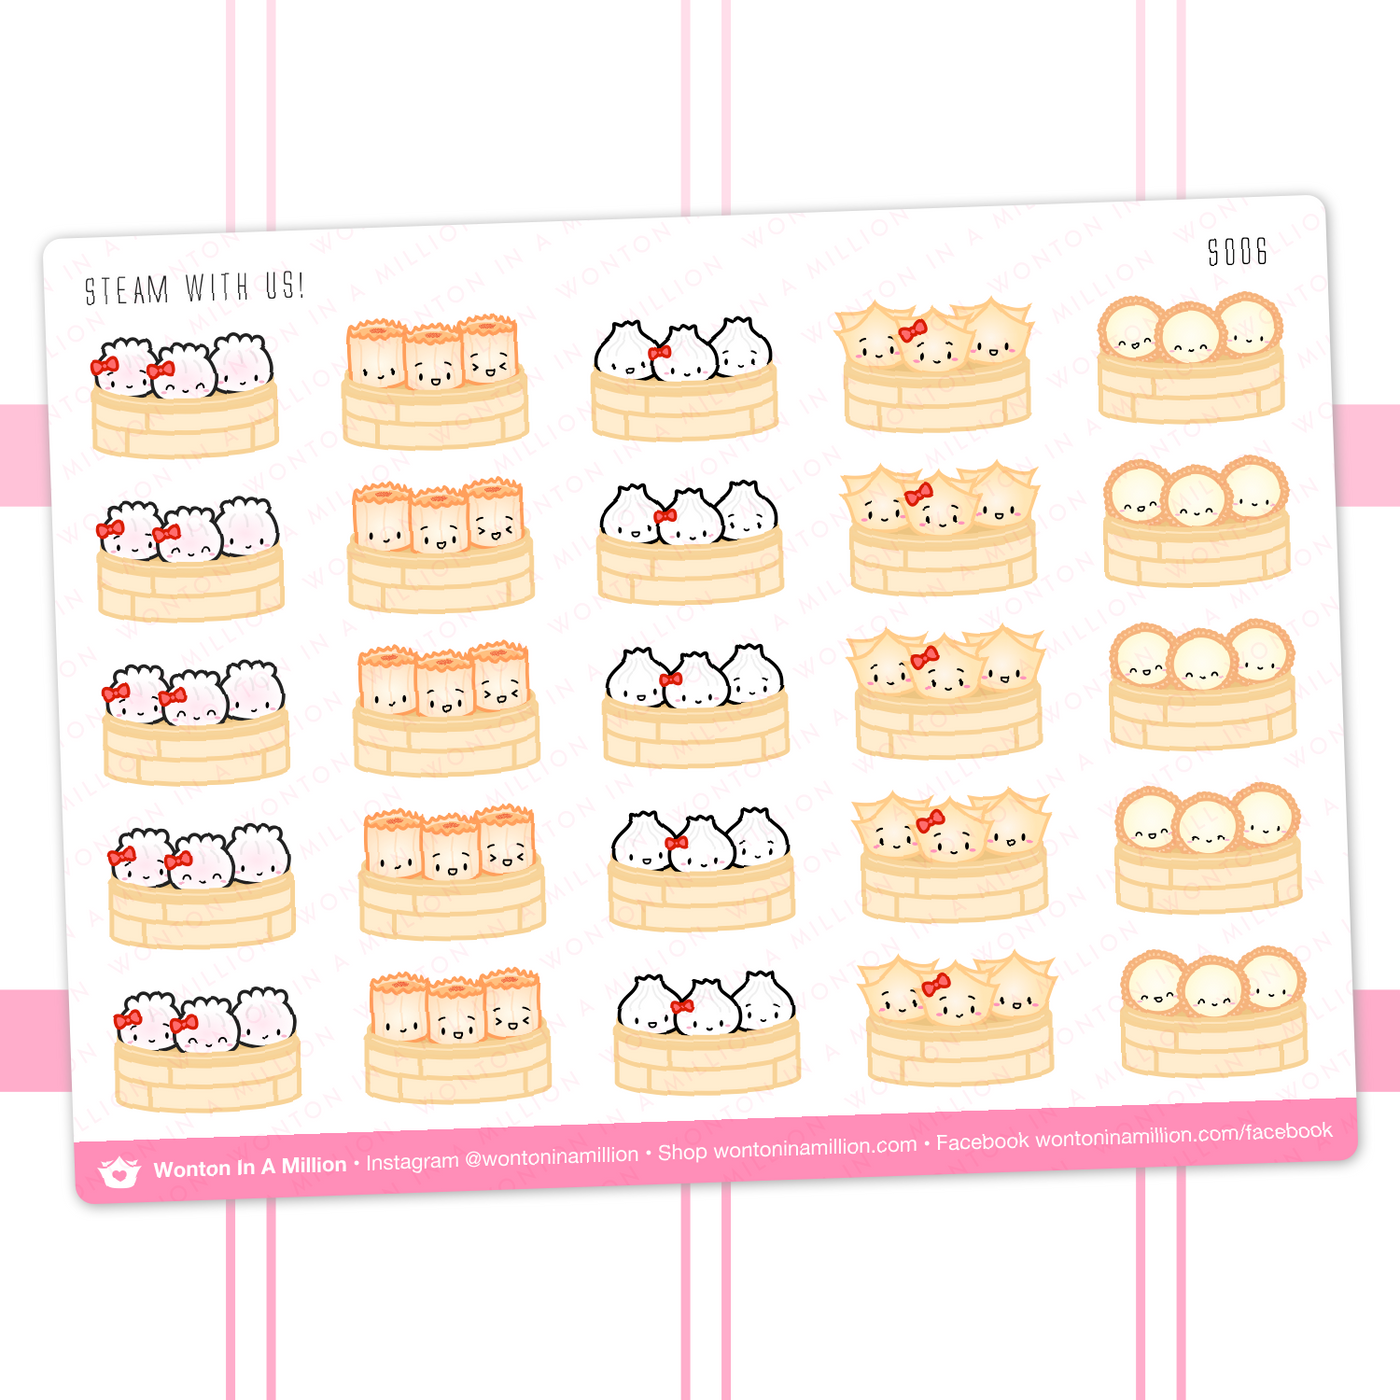 S006 | Dimsum Steamers Stickers